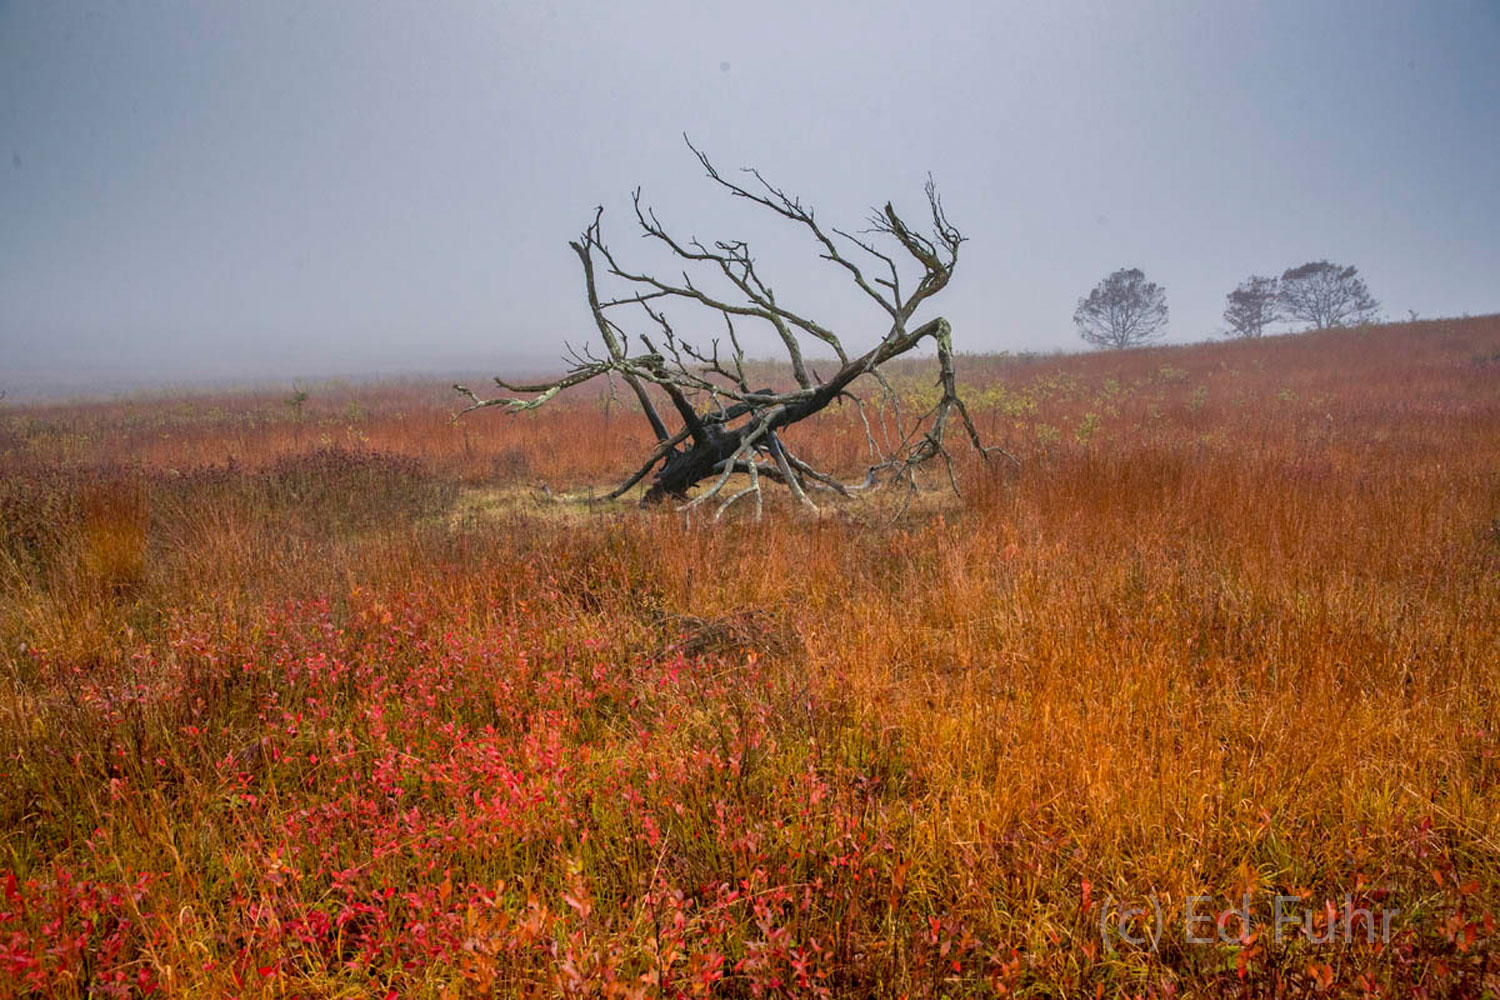 Like the skeleton of some extinct dinosaur, this dead tree rises above the grasses of Big Meadows.